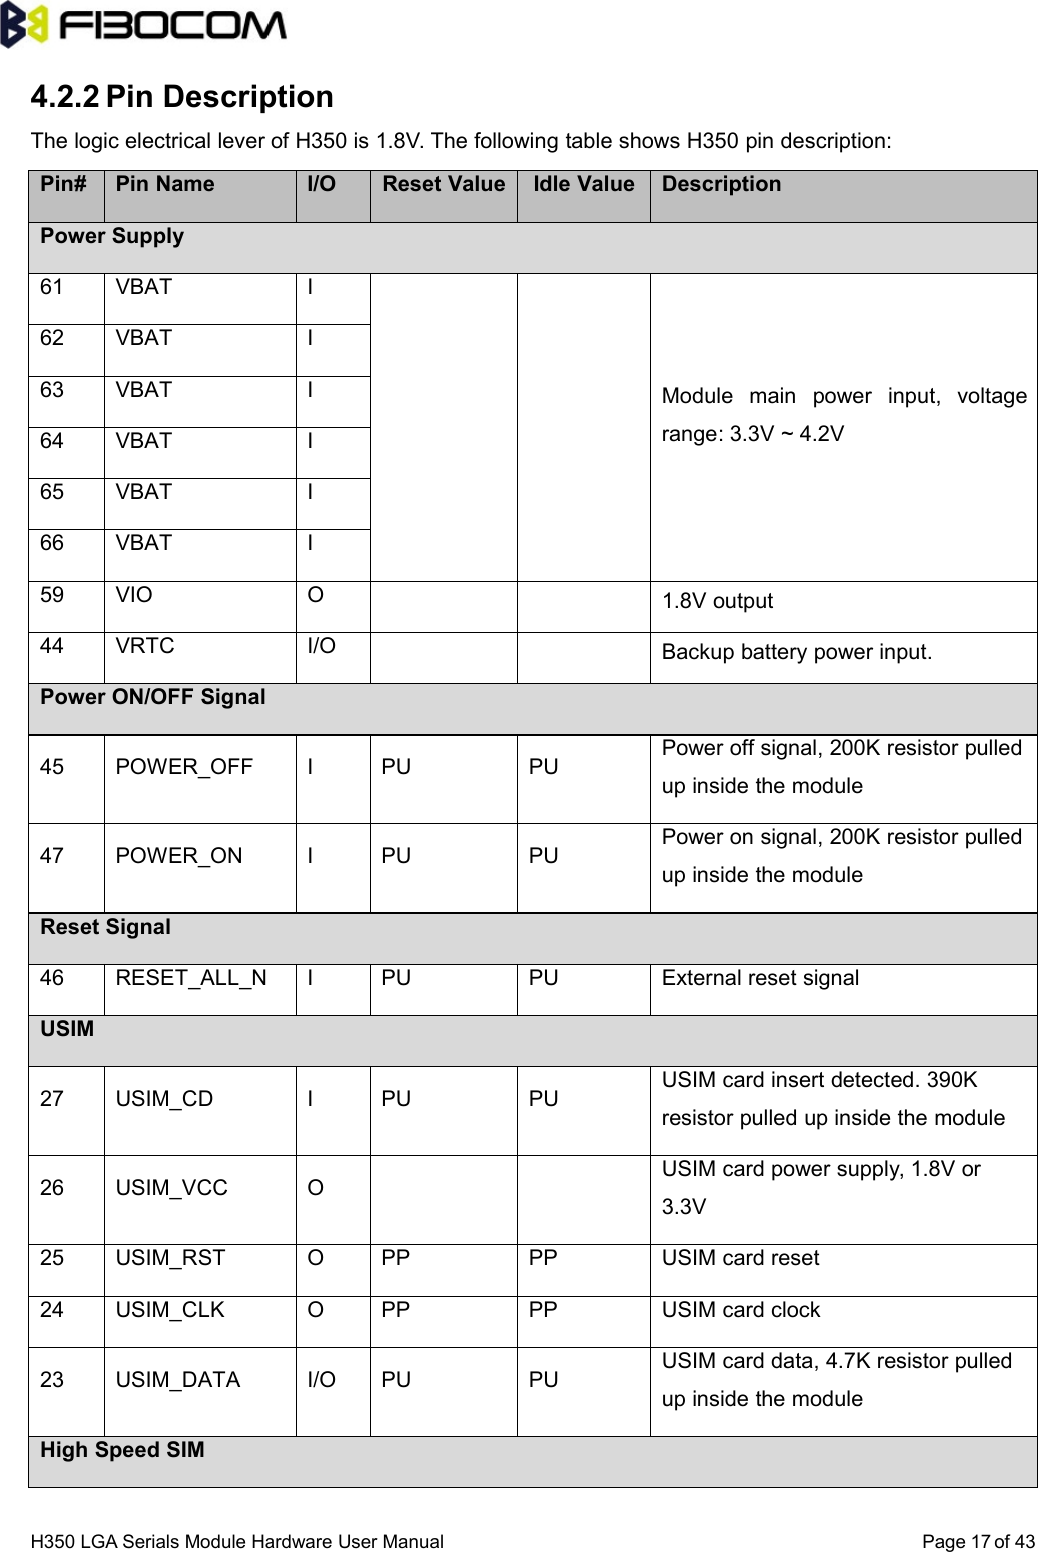 H350 LGA Serials Module Hardware User Manual Page of 43174.2.2 Pin DescriptionThe logic electrical lever of H350 is 1.8V. The following table shows H350 pin description:Pin# Pin Name I/O Reset Value Idle Value DescriptionPower Supply61 VBAT IModule main power input, voltagerange: 3.3V ~ 4.2V62 VBAT I63 VBAT I64 VBAT I65 VBAT I66 VBAT I59 VIO O 1.8V output44 VRTC I/O Backup battery power input.Power ON/OFF Signal45 POWER_OFF I PU PU Power off signal, 200K resistor pulledup inside the module47 POWER_ON I PU PU Power on signal, 200K resistor pulledup inside the moduleReset Signal46 RESET_ALL_N I PU PU External reset signalUSIM27 USIM_CD I PU PU USIM card insert detected. 390Kresistor pulled up inside the module26 USIM_VCC O USIM card power supply, 1.8V or3.3V25 USIM_RST O PP PP USIM card reset24 USIM_CLK O PP PP USIM card clock23 USIM_DATA I/O PU PU USIM card data, 4.7K resistor pulledup inside the moduleHigh Speed SIM